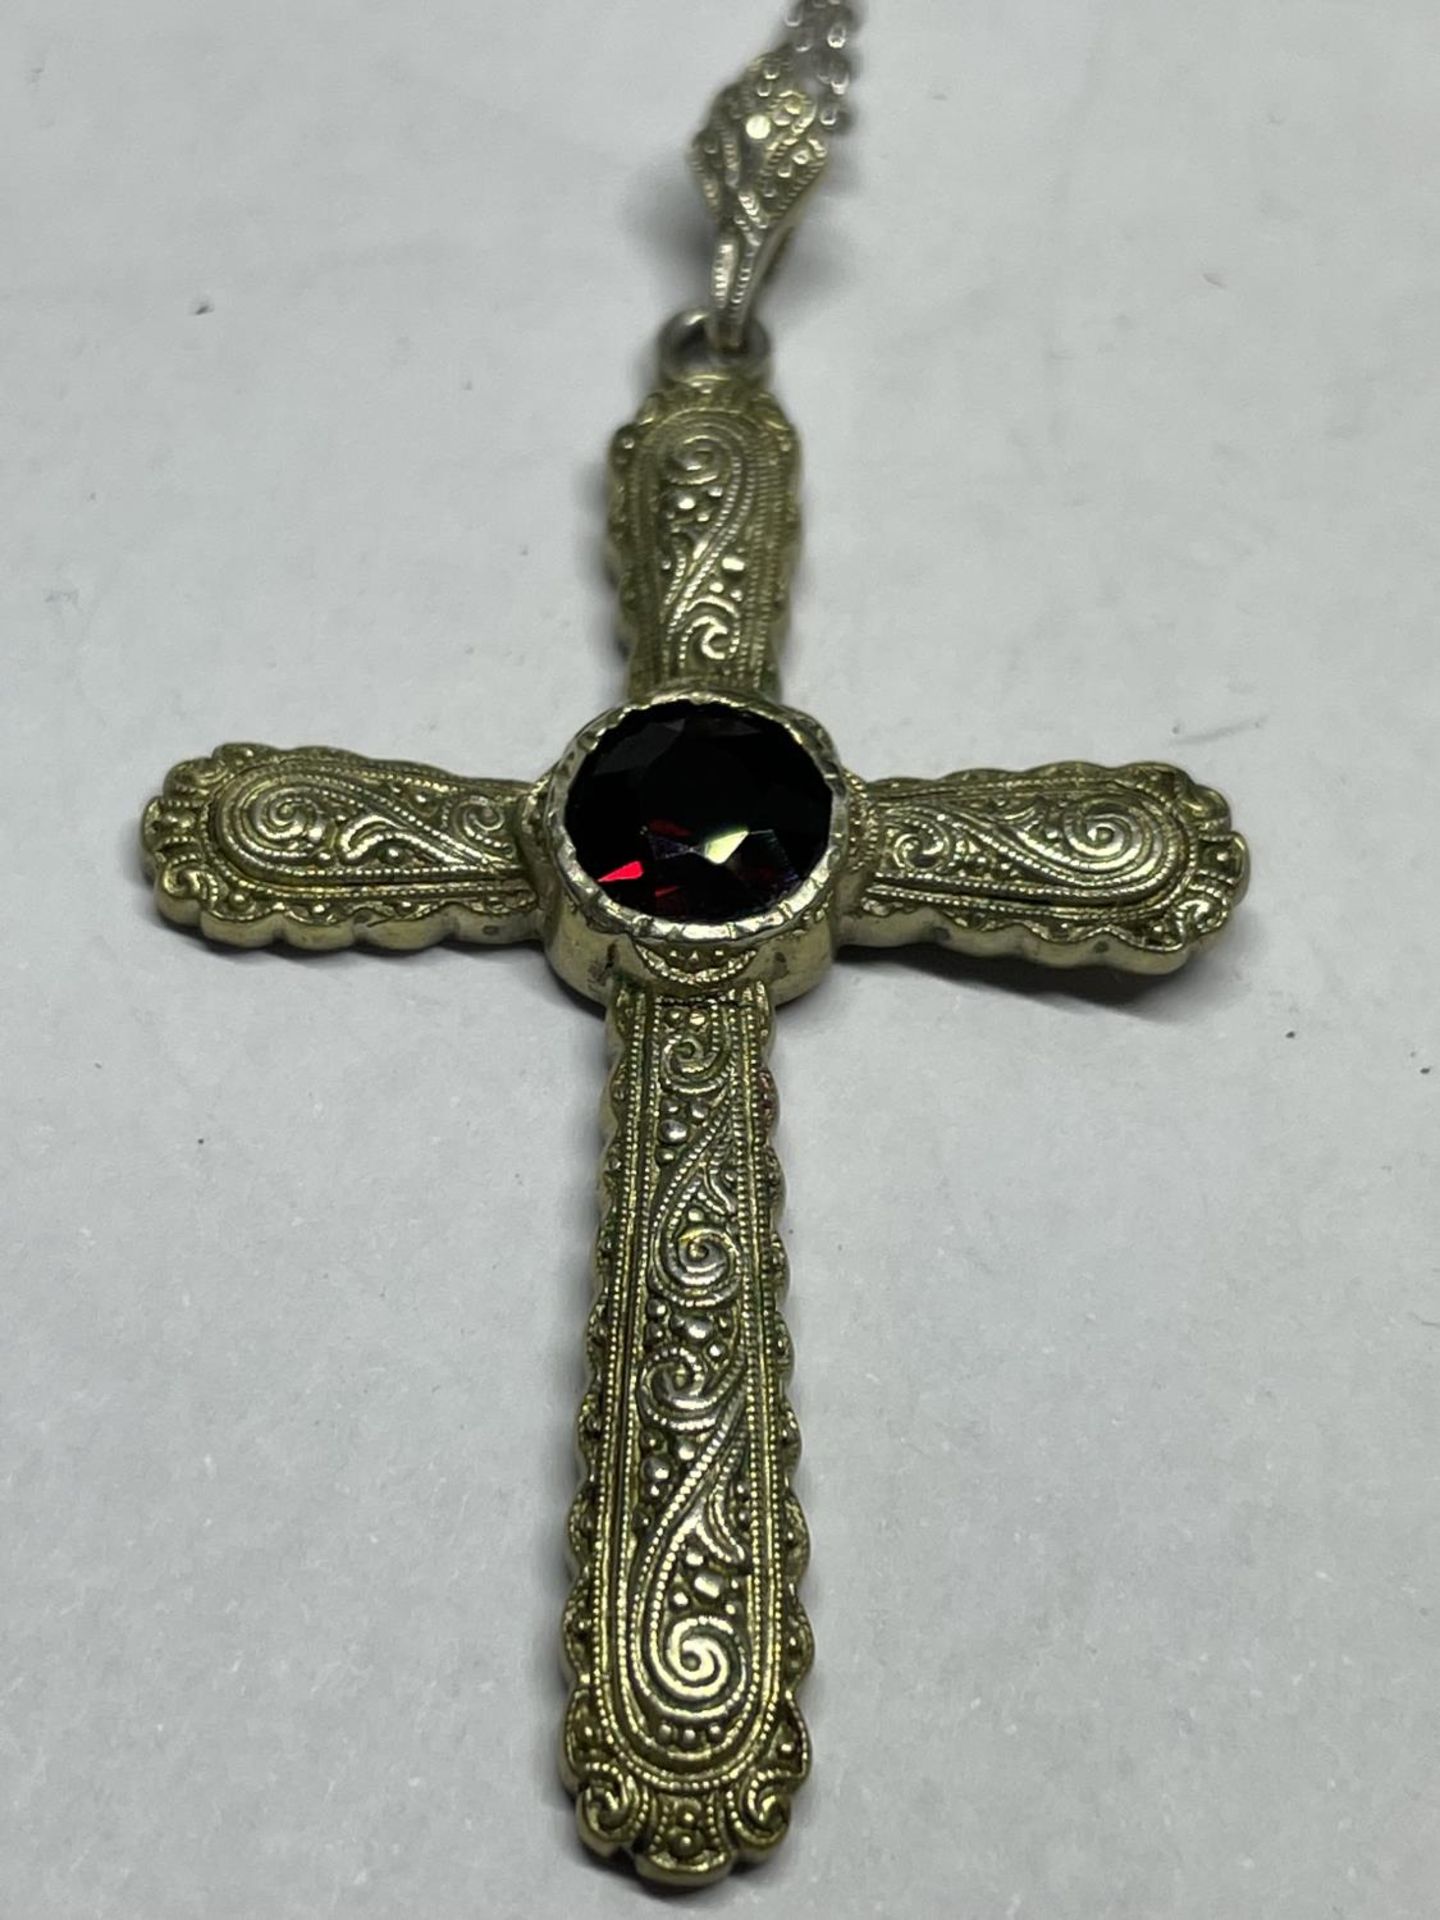 TWO SILVER CROSS PENDANTS ON CHAINS - Image 4 of 8